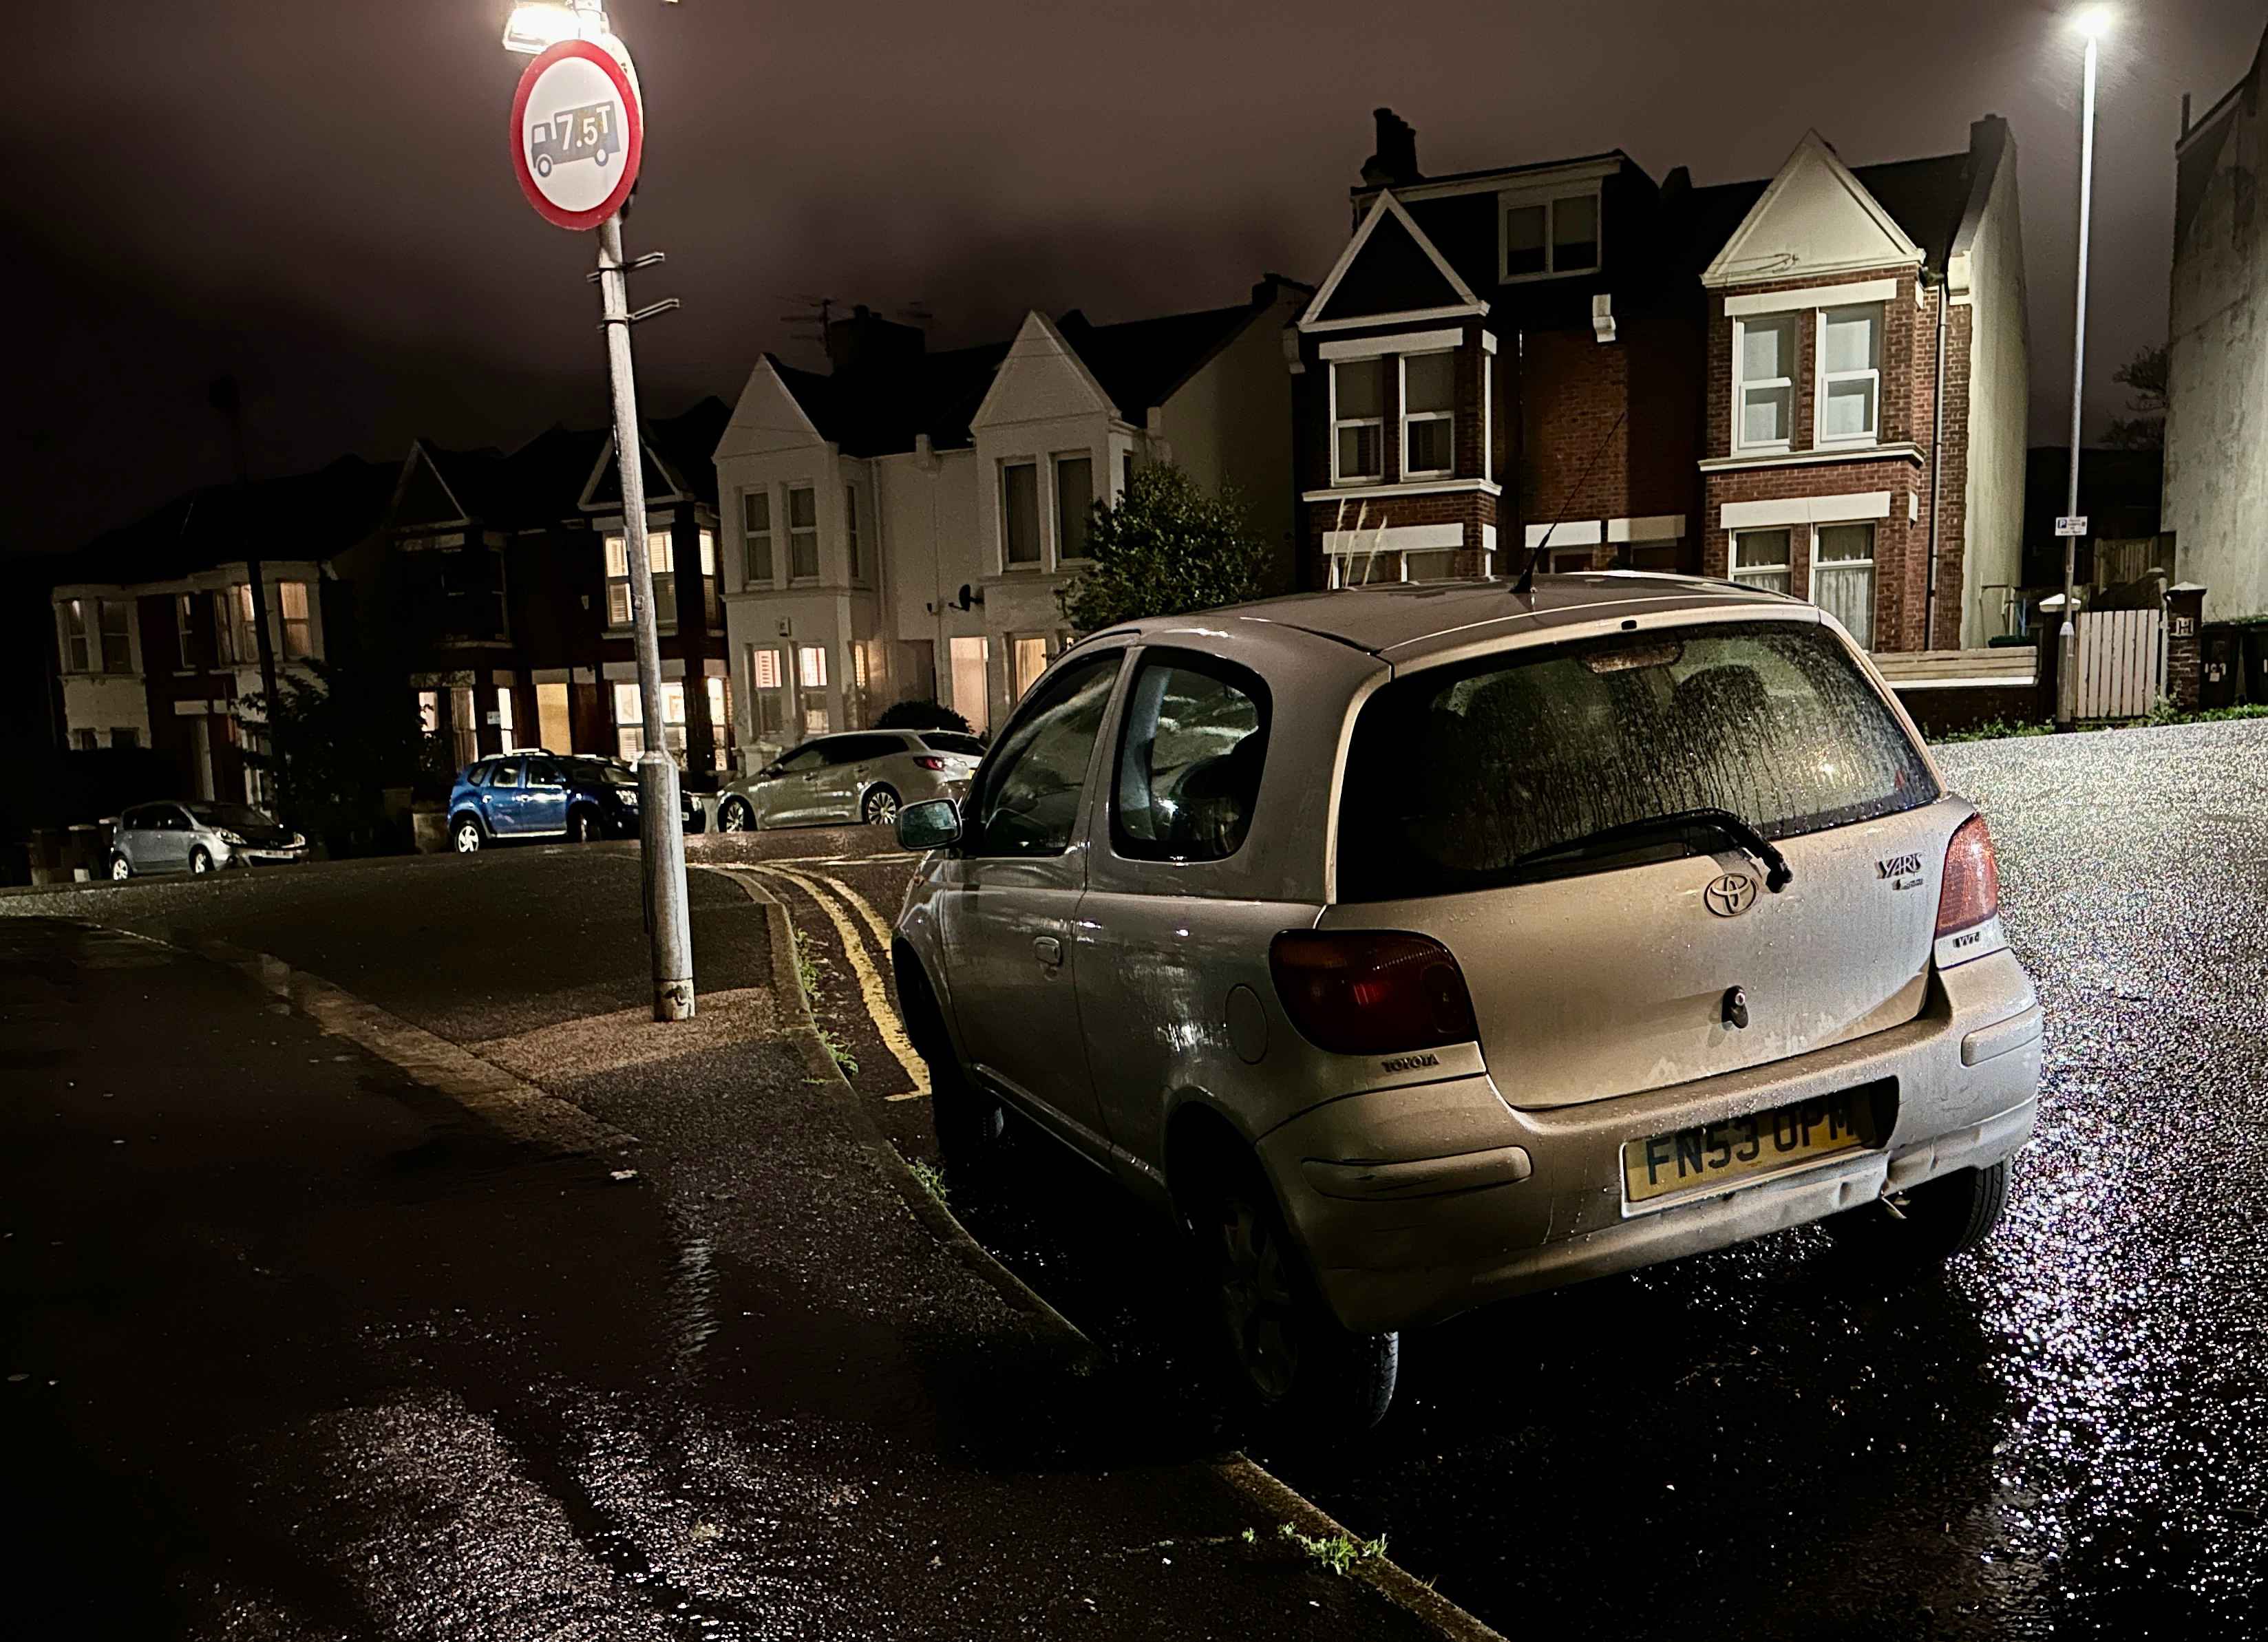 Photograph of FN53 OPM - a Silver Toyota Yaris parked in Hollingdean by a non-resident. The third of five photographs supplied by the residents of Hollingdean.